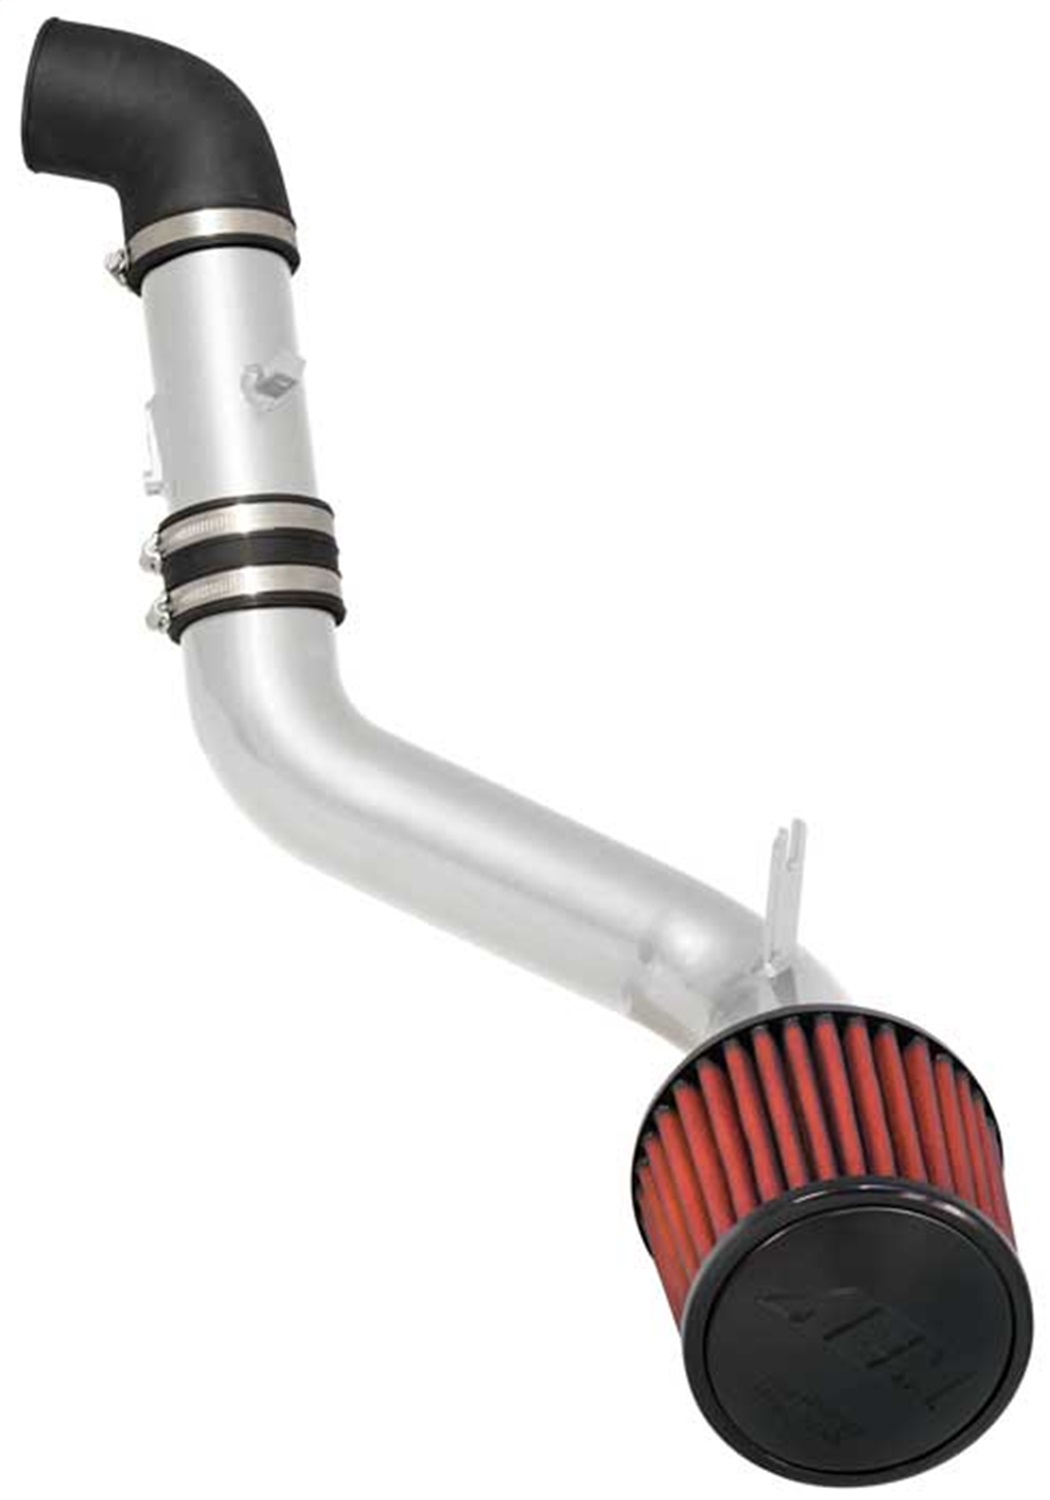 AEM Induction AEM Induction 21-685P Cold Air Induction System Fits 06-11 Civic